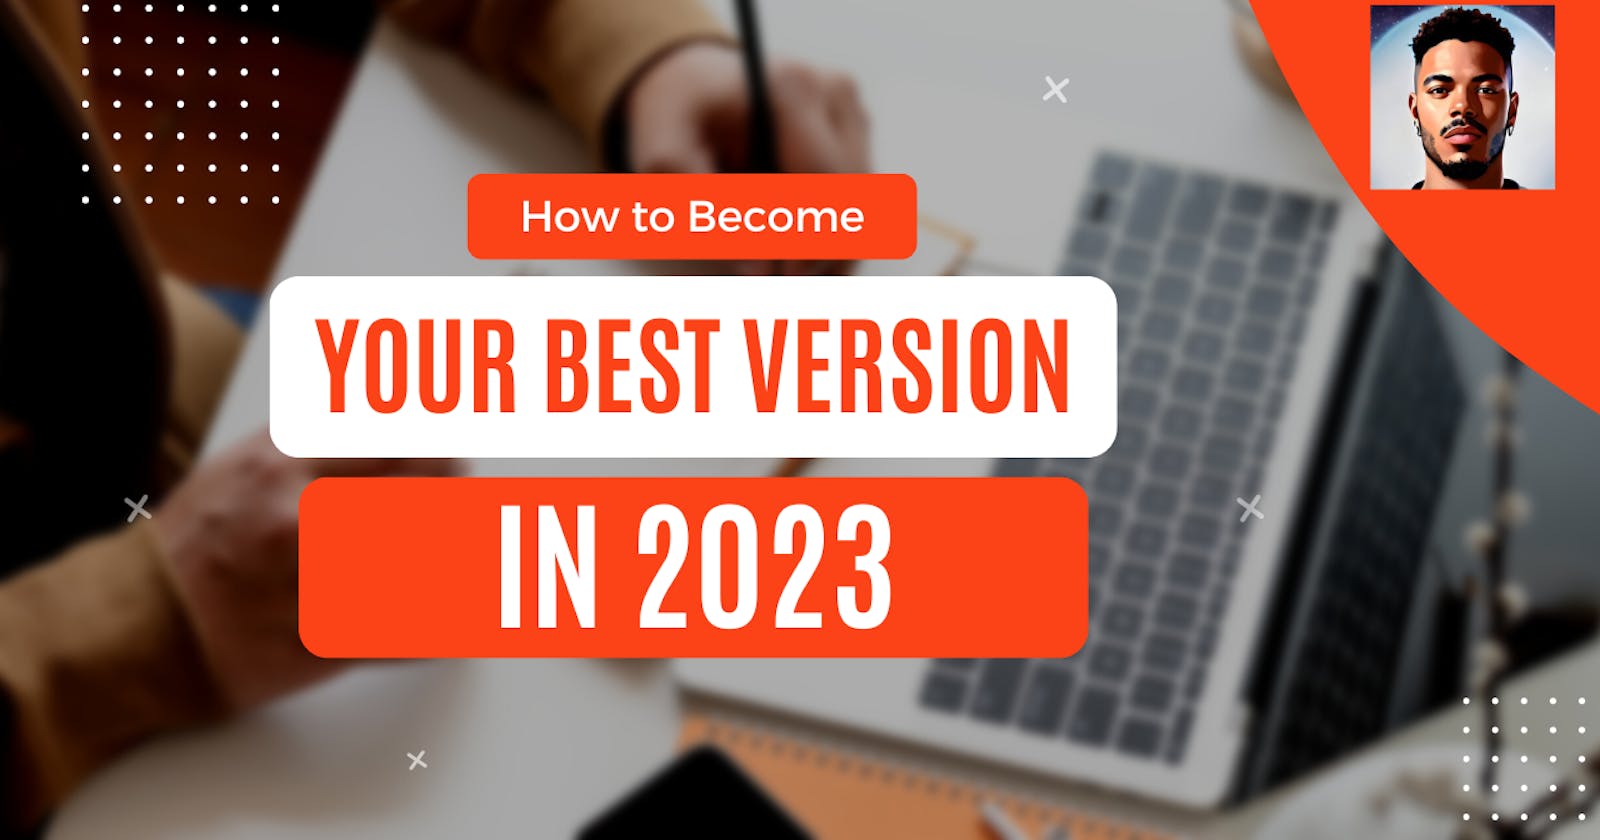 How to Become Your Best Version in 2023